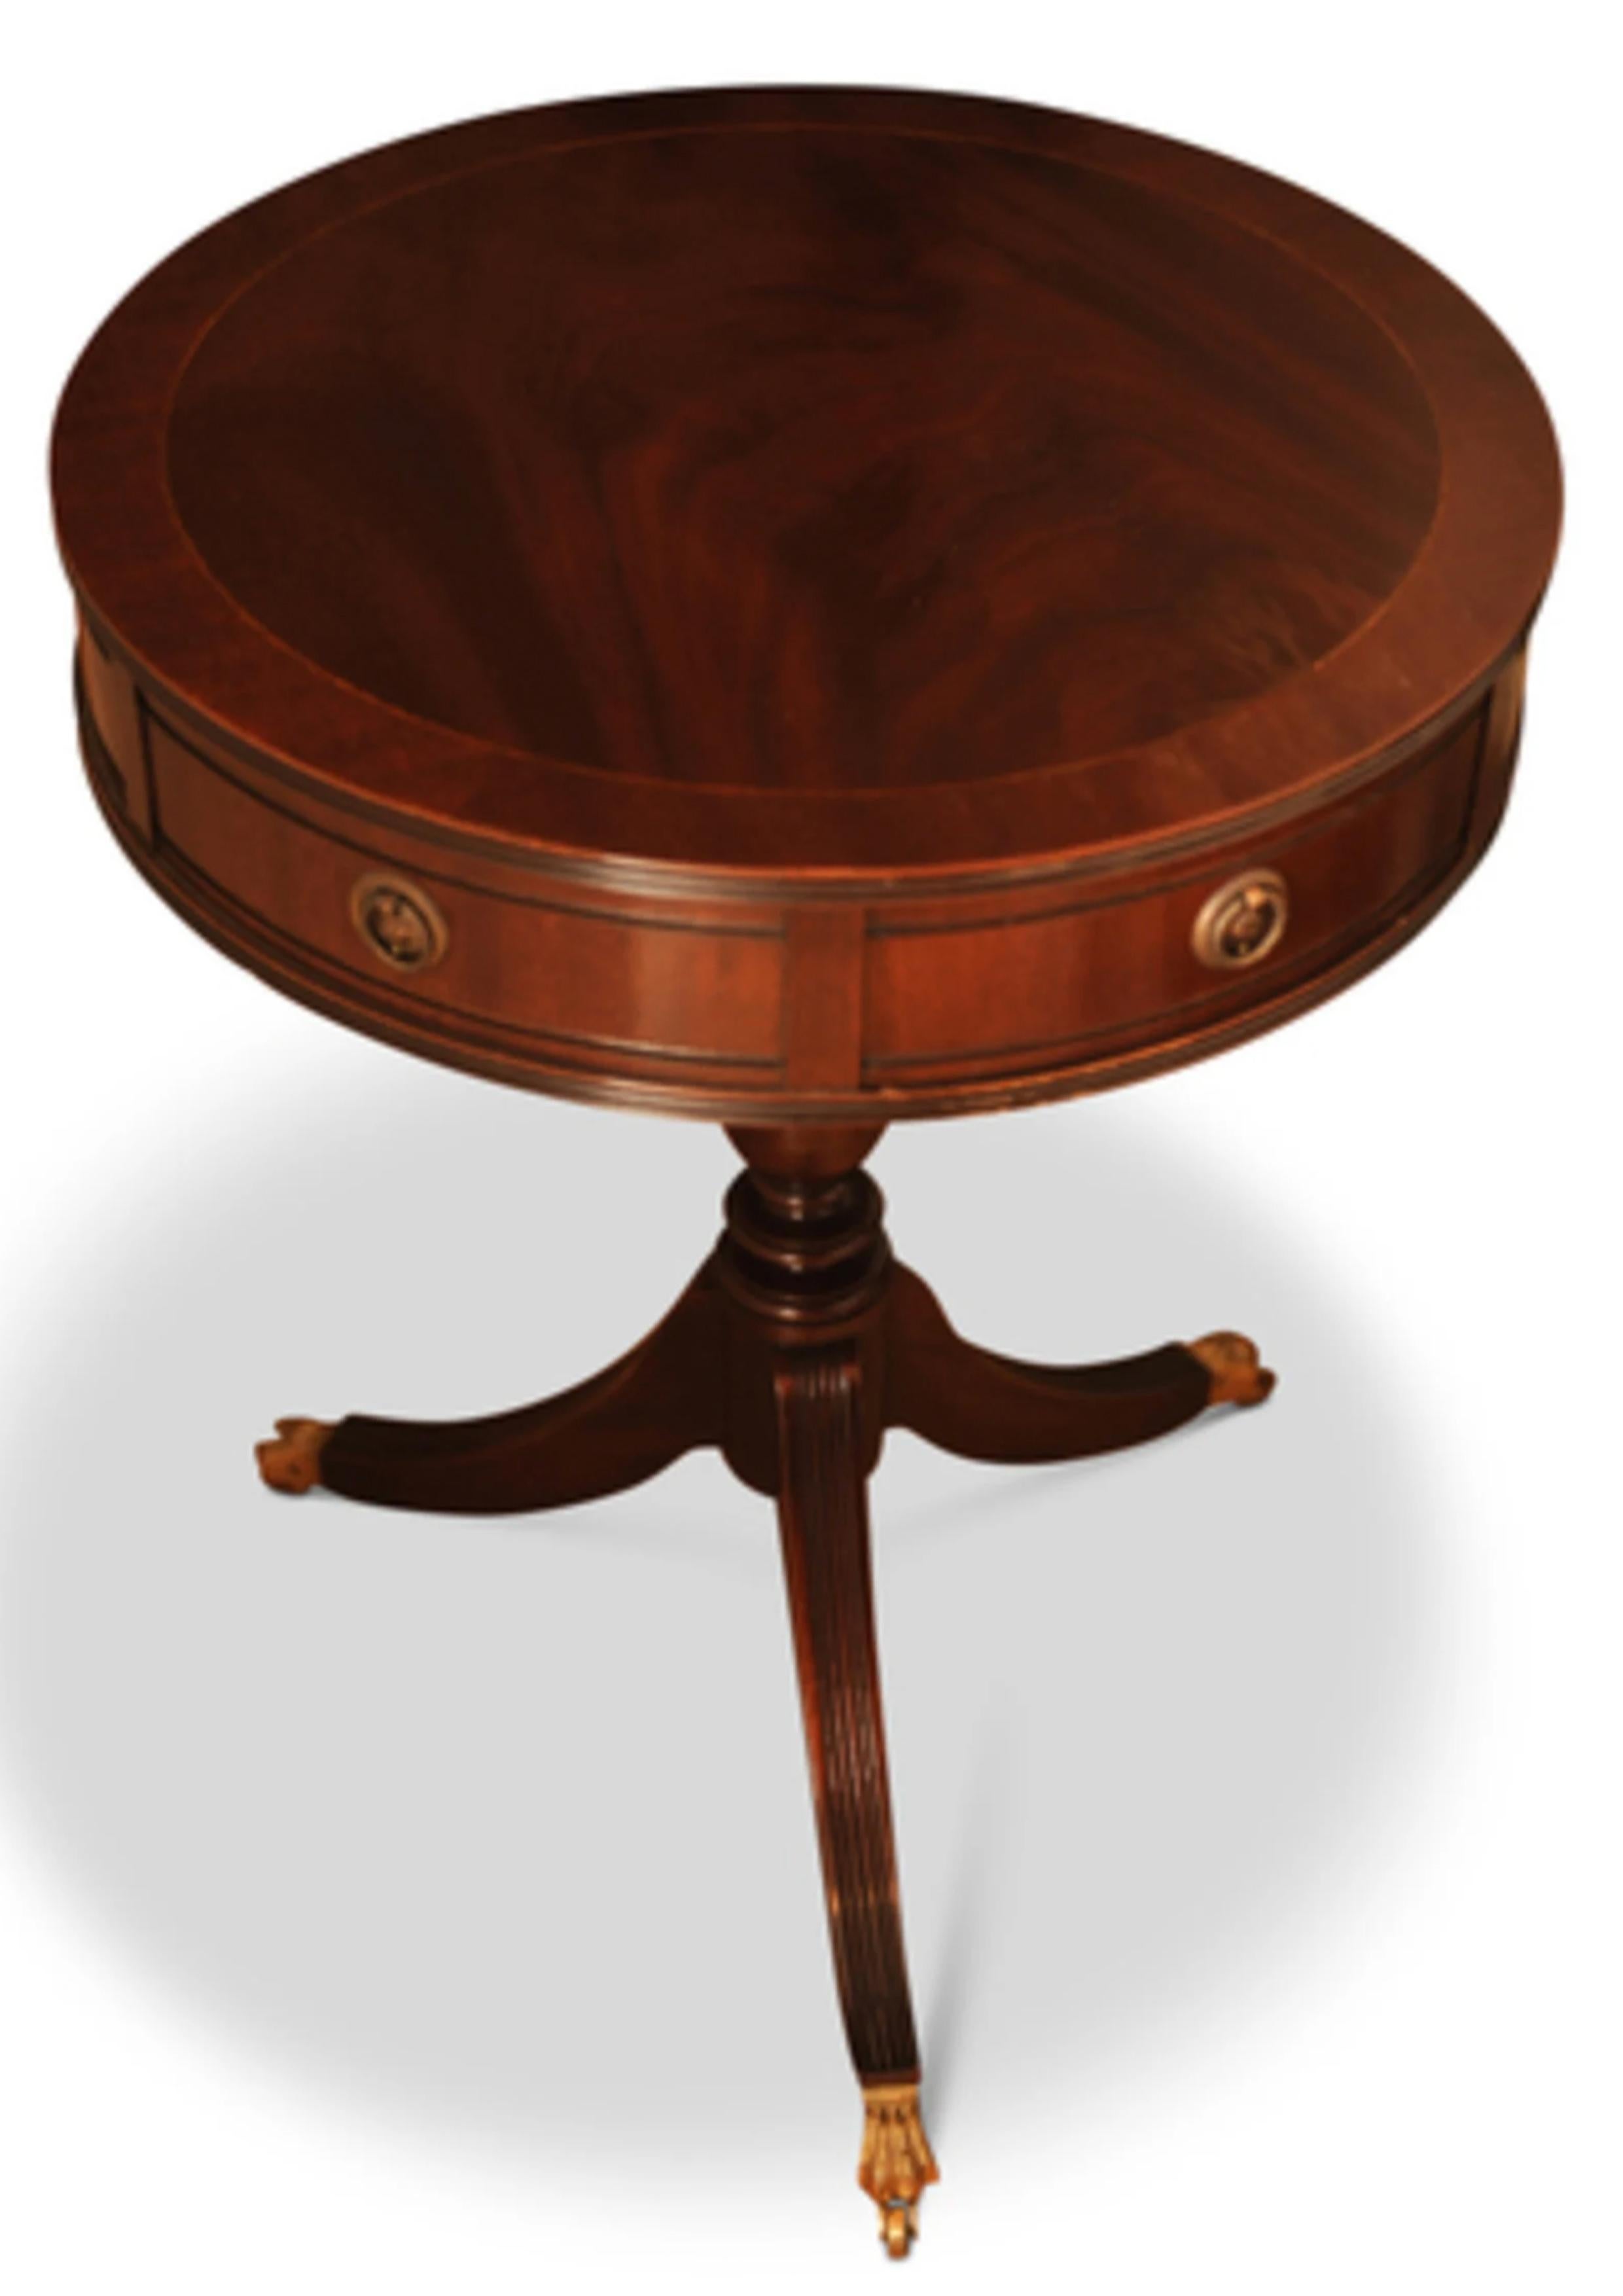 Hand-Crafted Kennedy For Harrods Regency Circular Drum Table With Brass Fixtures and Paw Feet For Sale